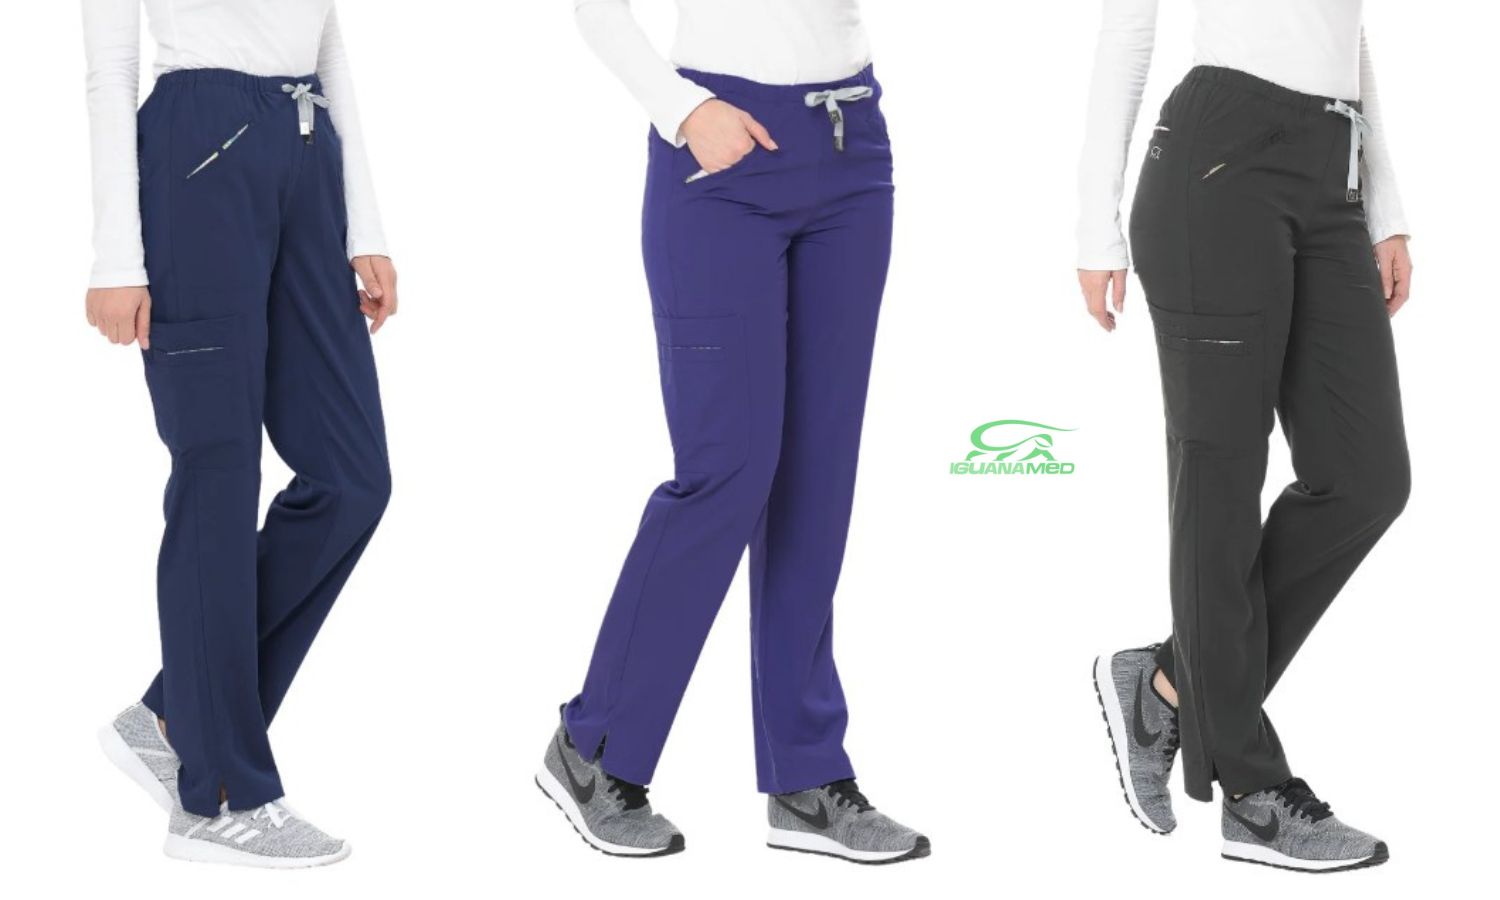 10 Reasons Why Figs Scrub Pants Are a Must-Have for Healthcare Professionals